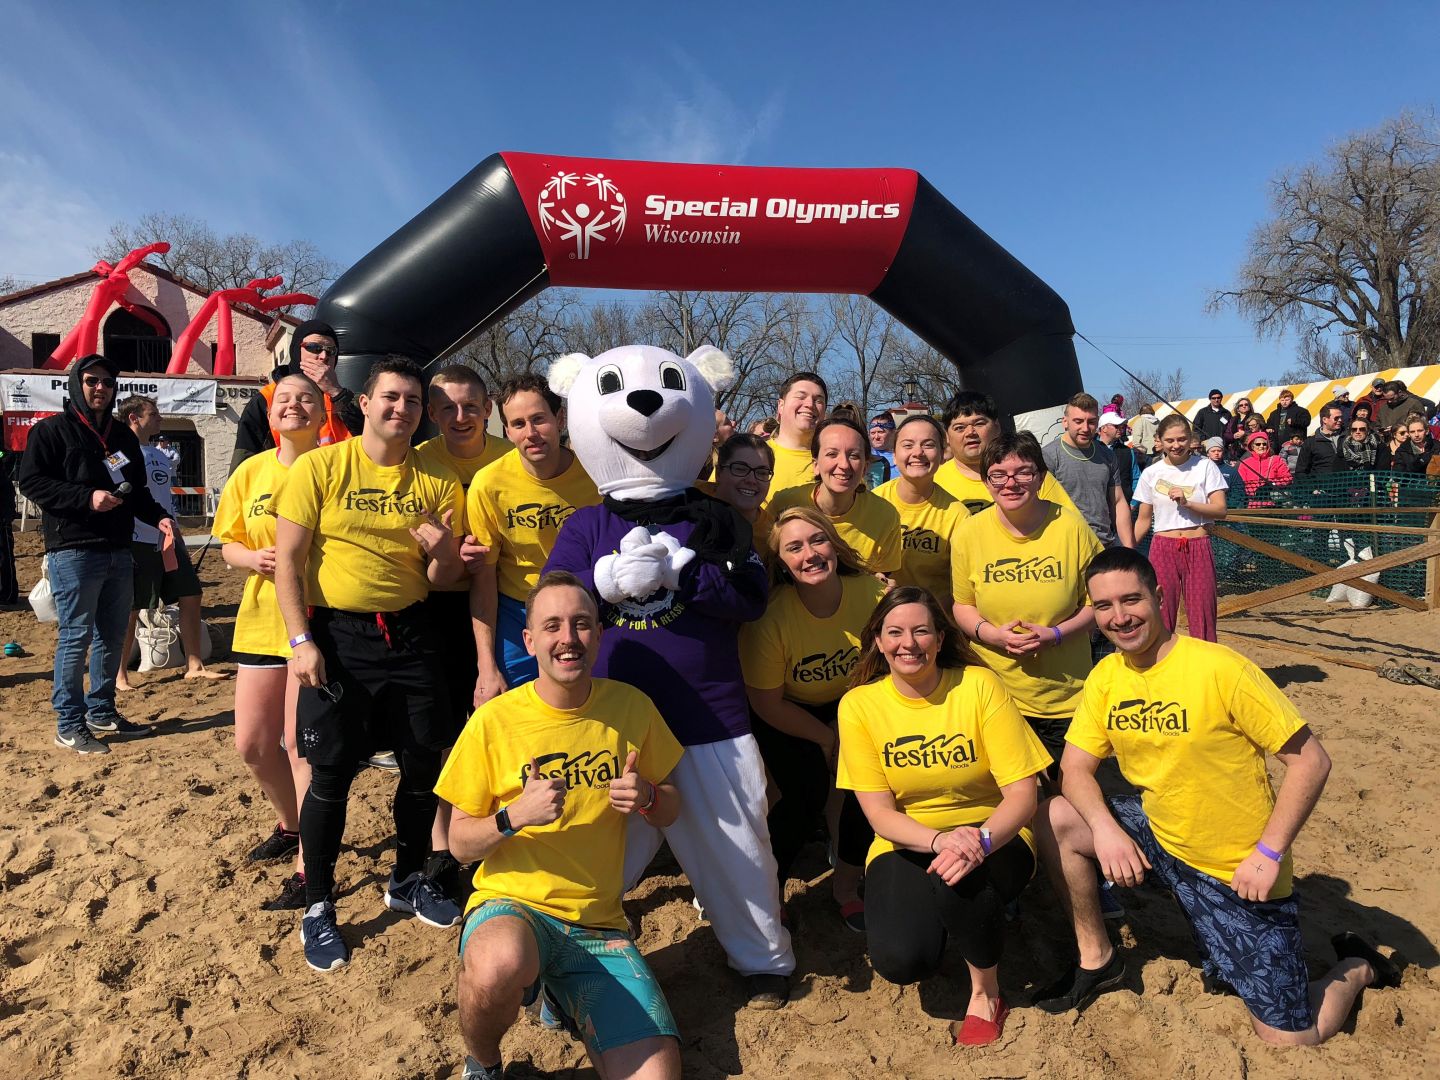 The Polar Plunge is now a bona fide Wisconsin tradition - thousands of friends, family members and co-workers come together every year to show support for SOWI athletes